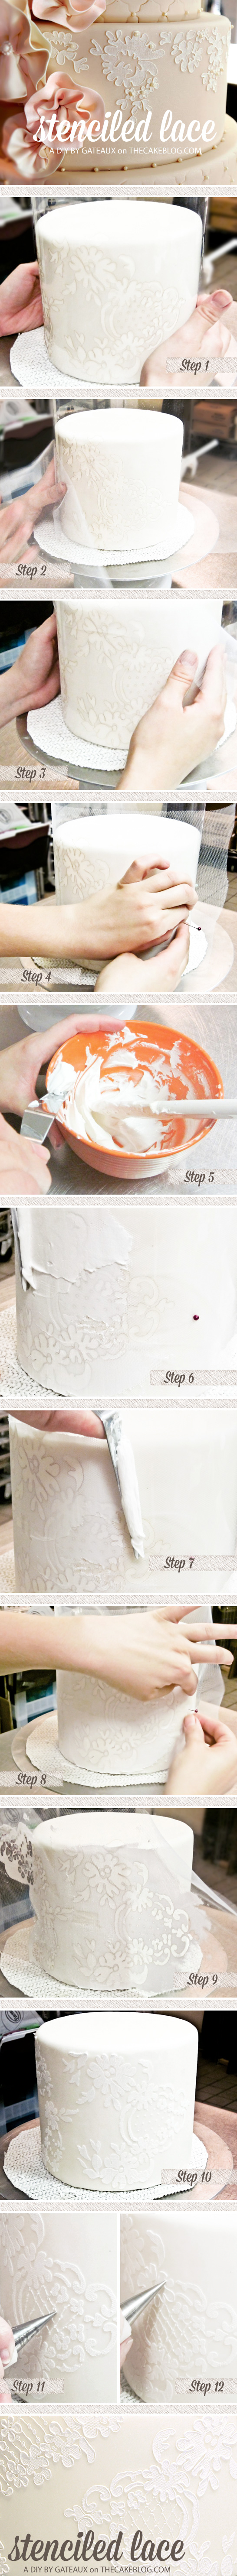 Stenciled Lace Cake Tutorial  |  by Gateaux Inc  |  TheCakeBlog.com